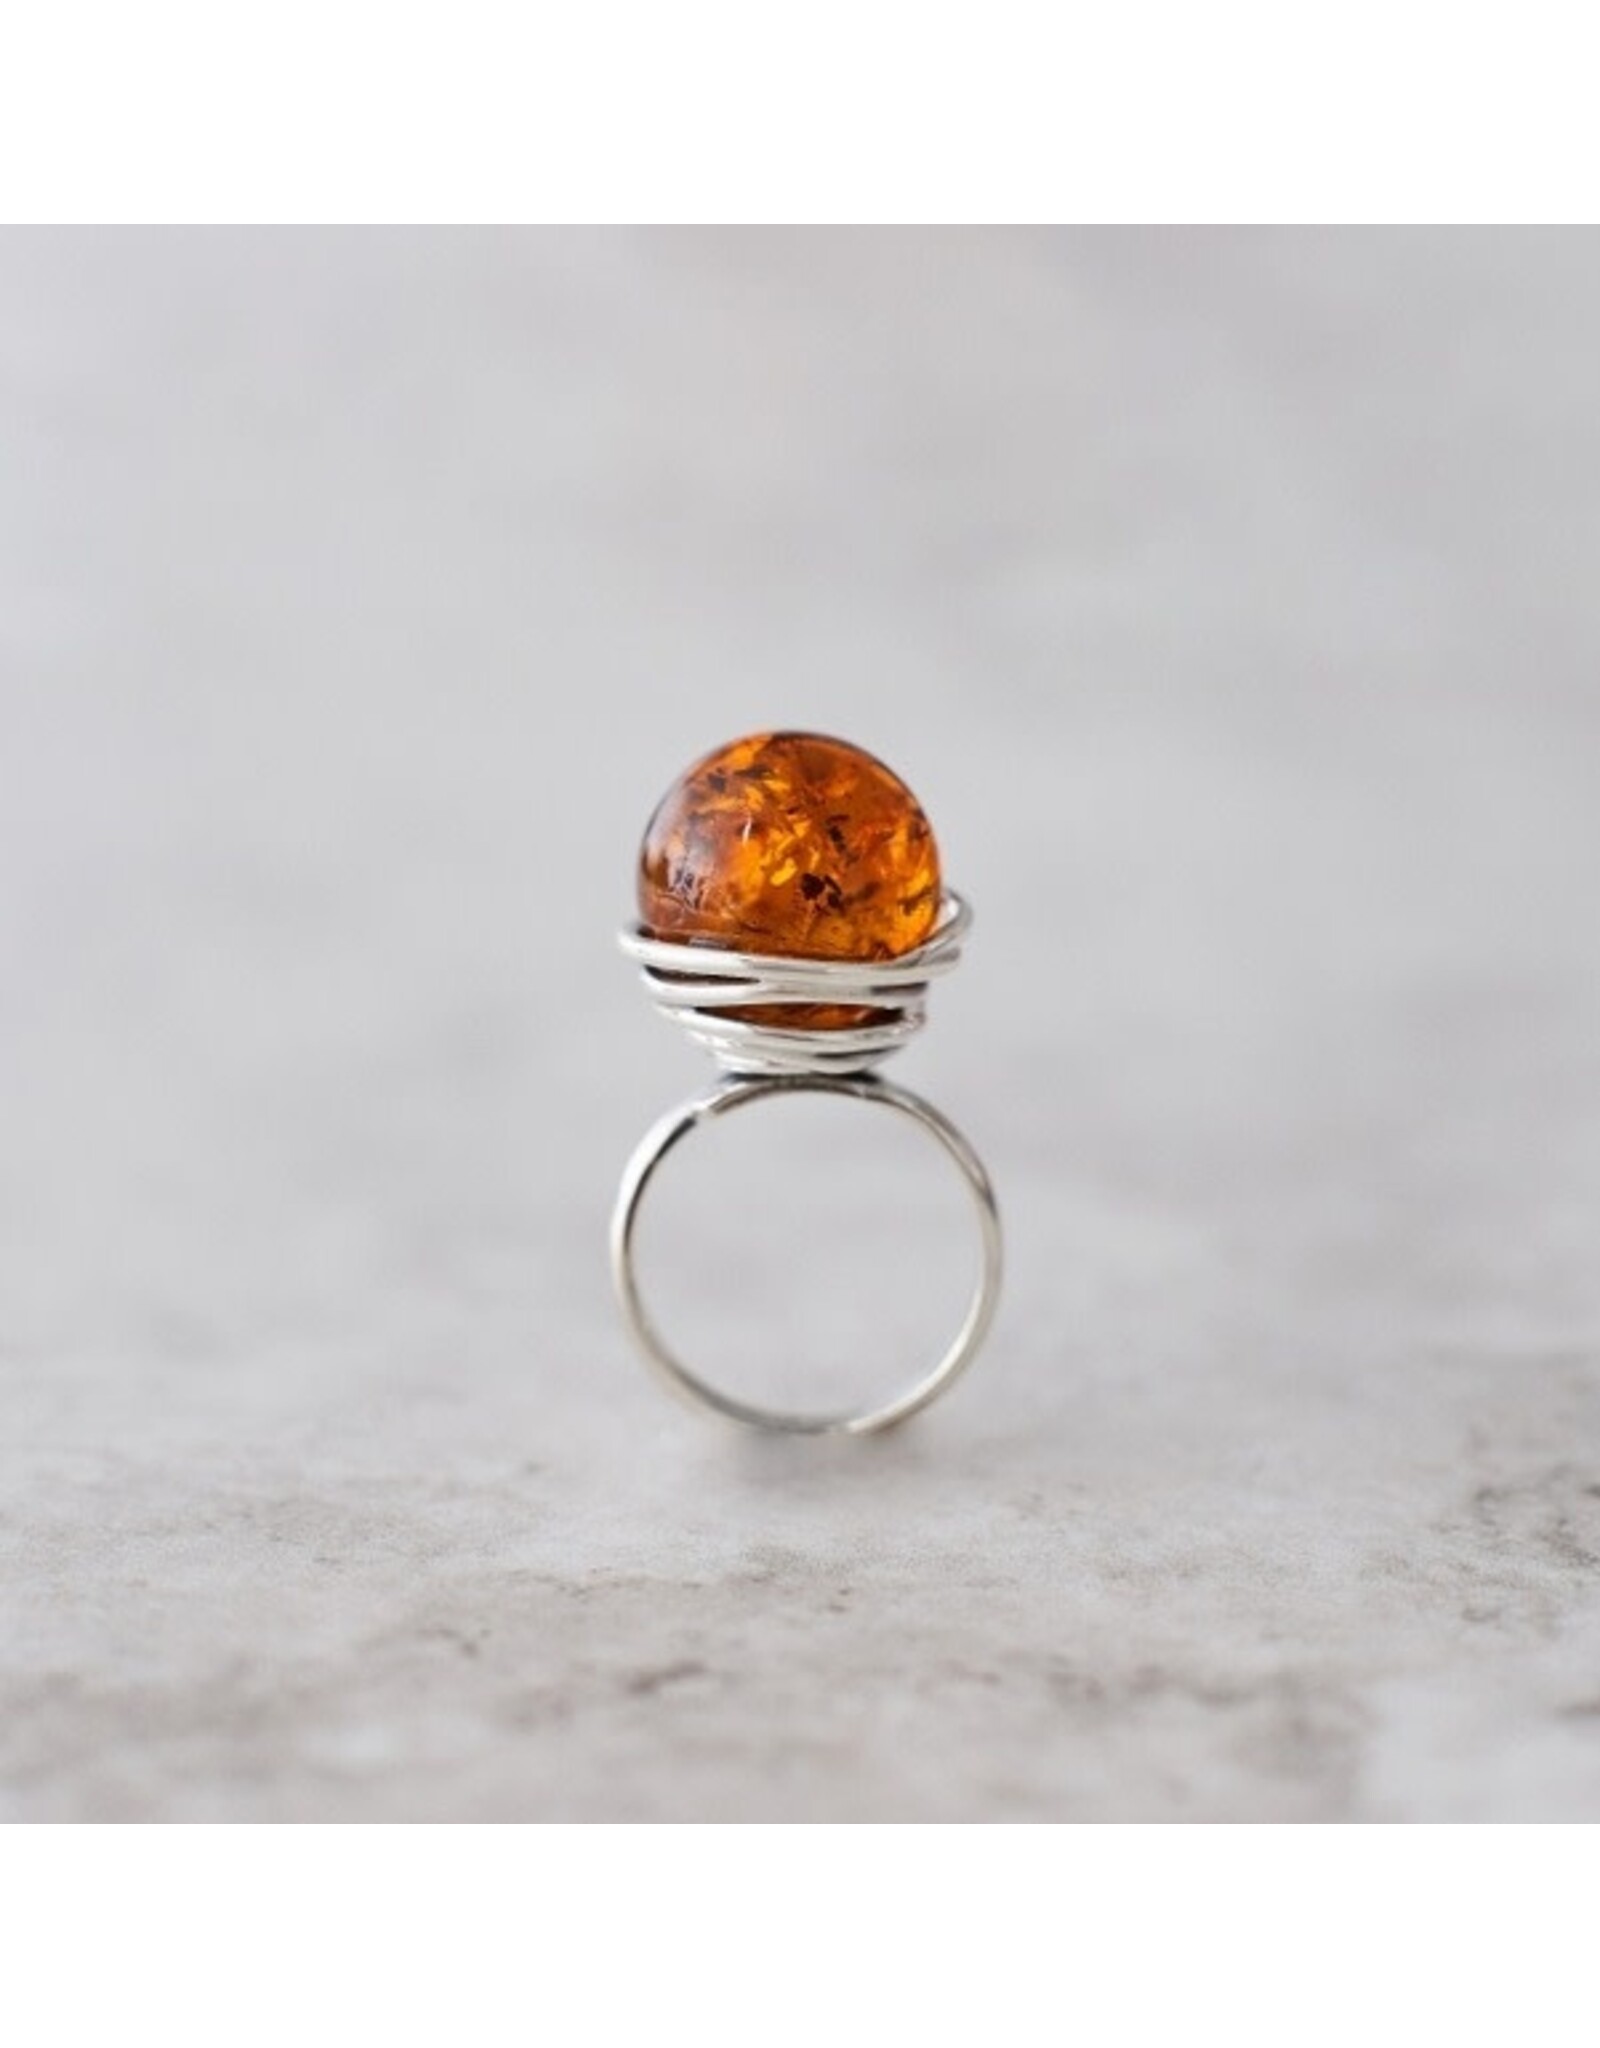 925 Silver Baltic Amber Ring "Amber Orb"